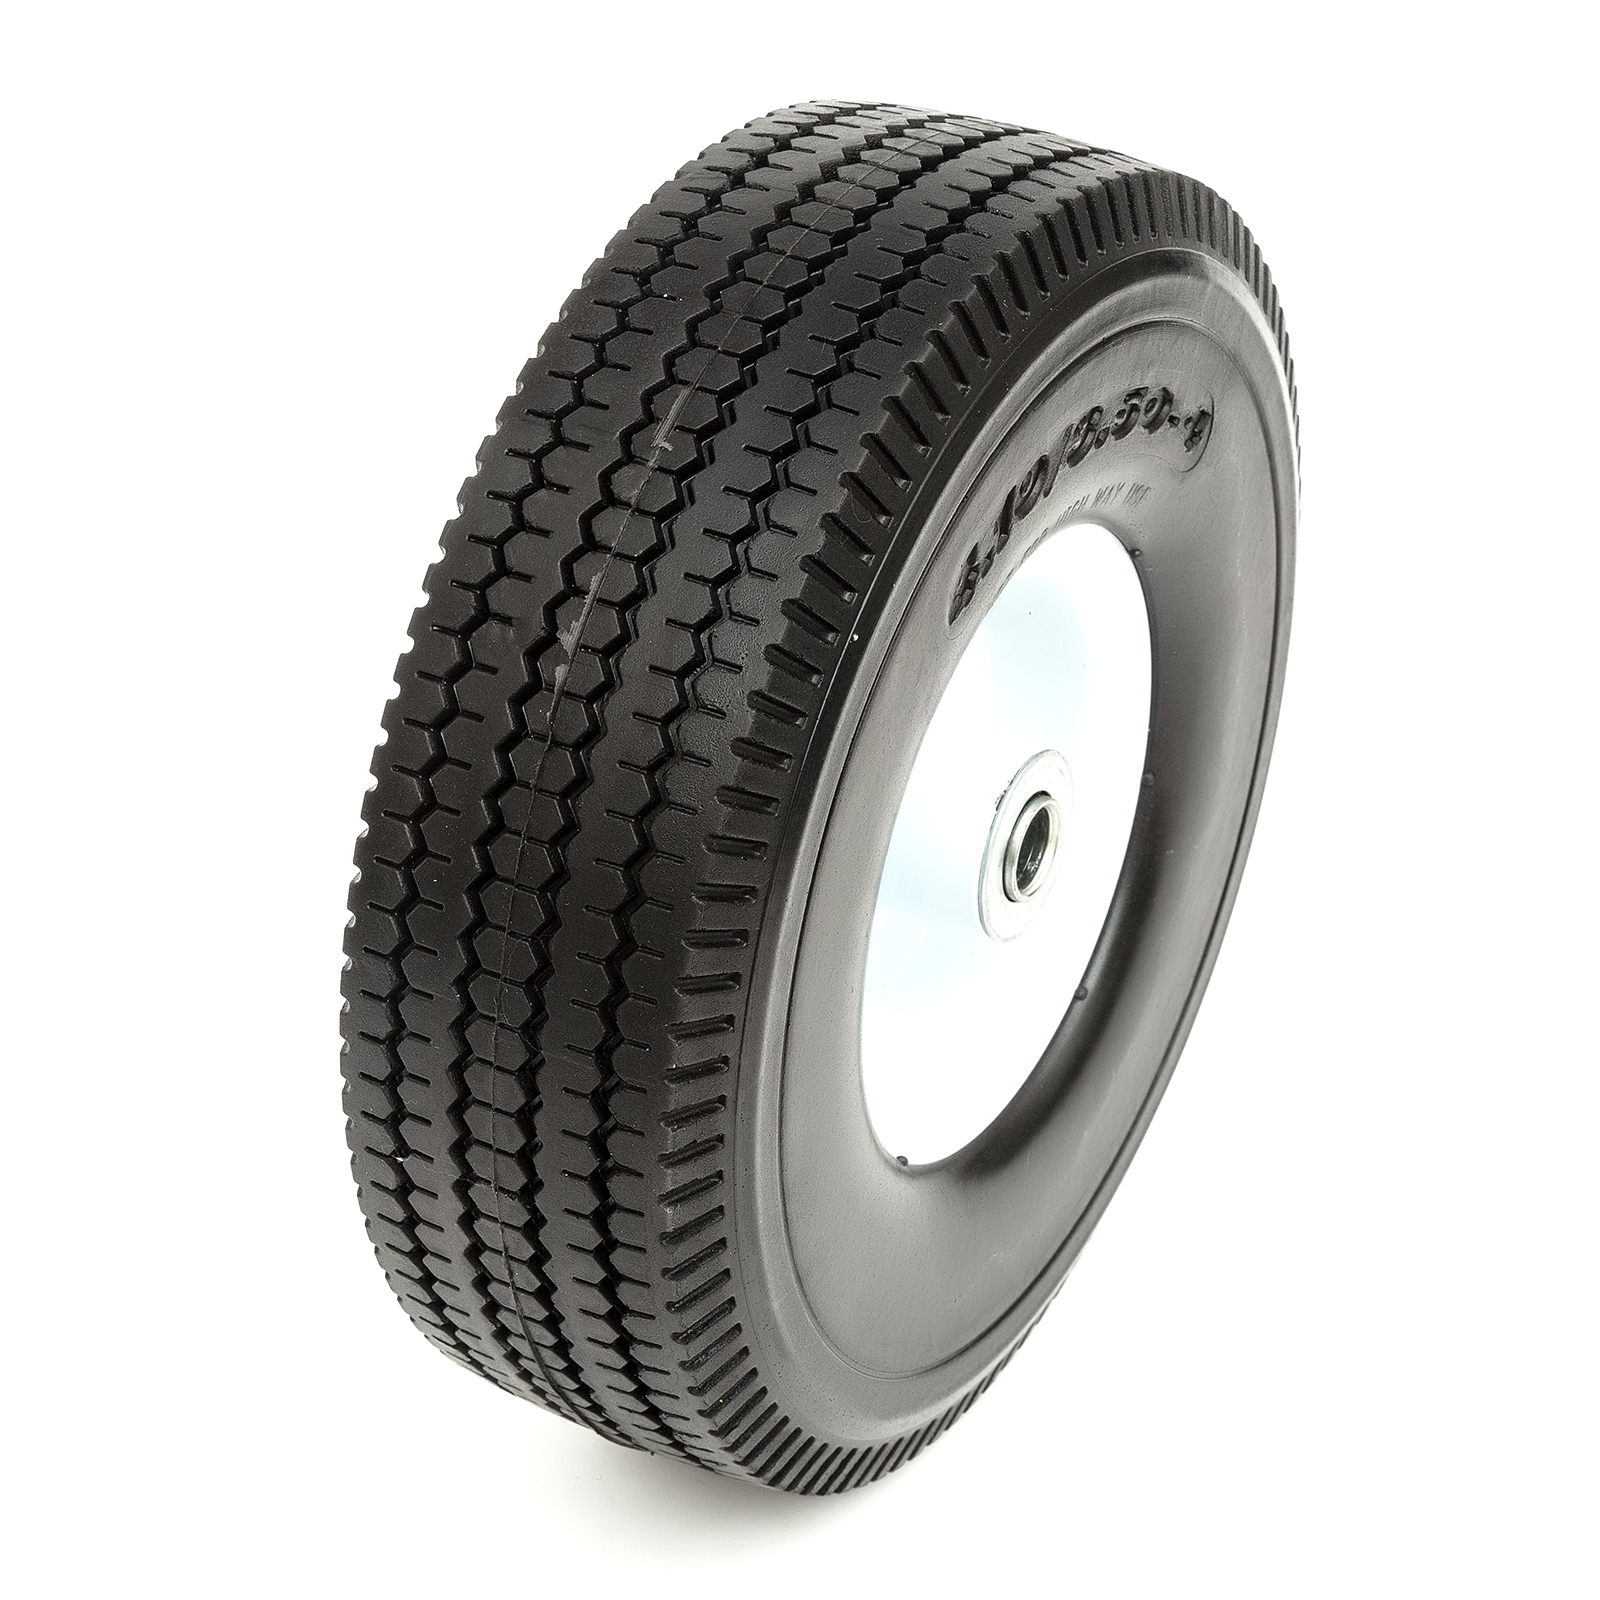 10 Inch 4.10//3.50-4 Solid PU Puncture Proof Tyre /& Offset Hub Metal Wheel Barrow